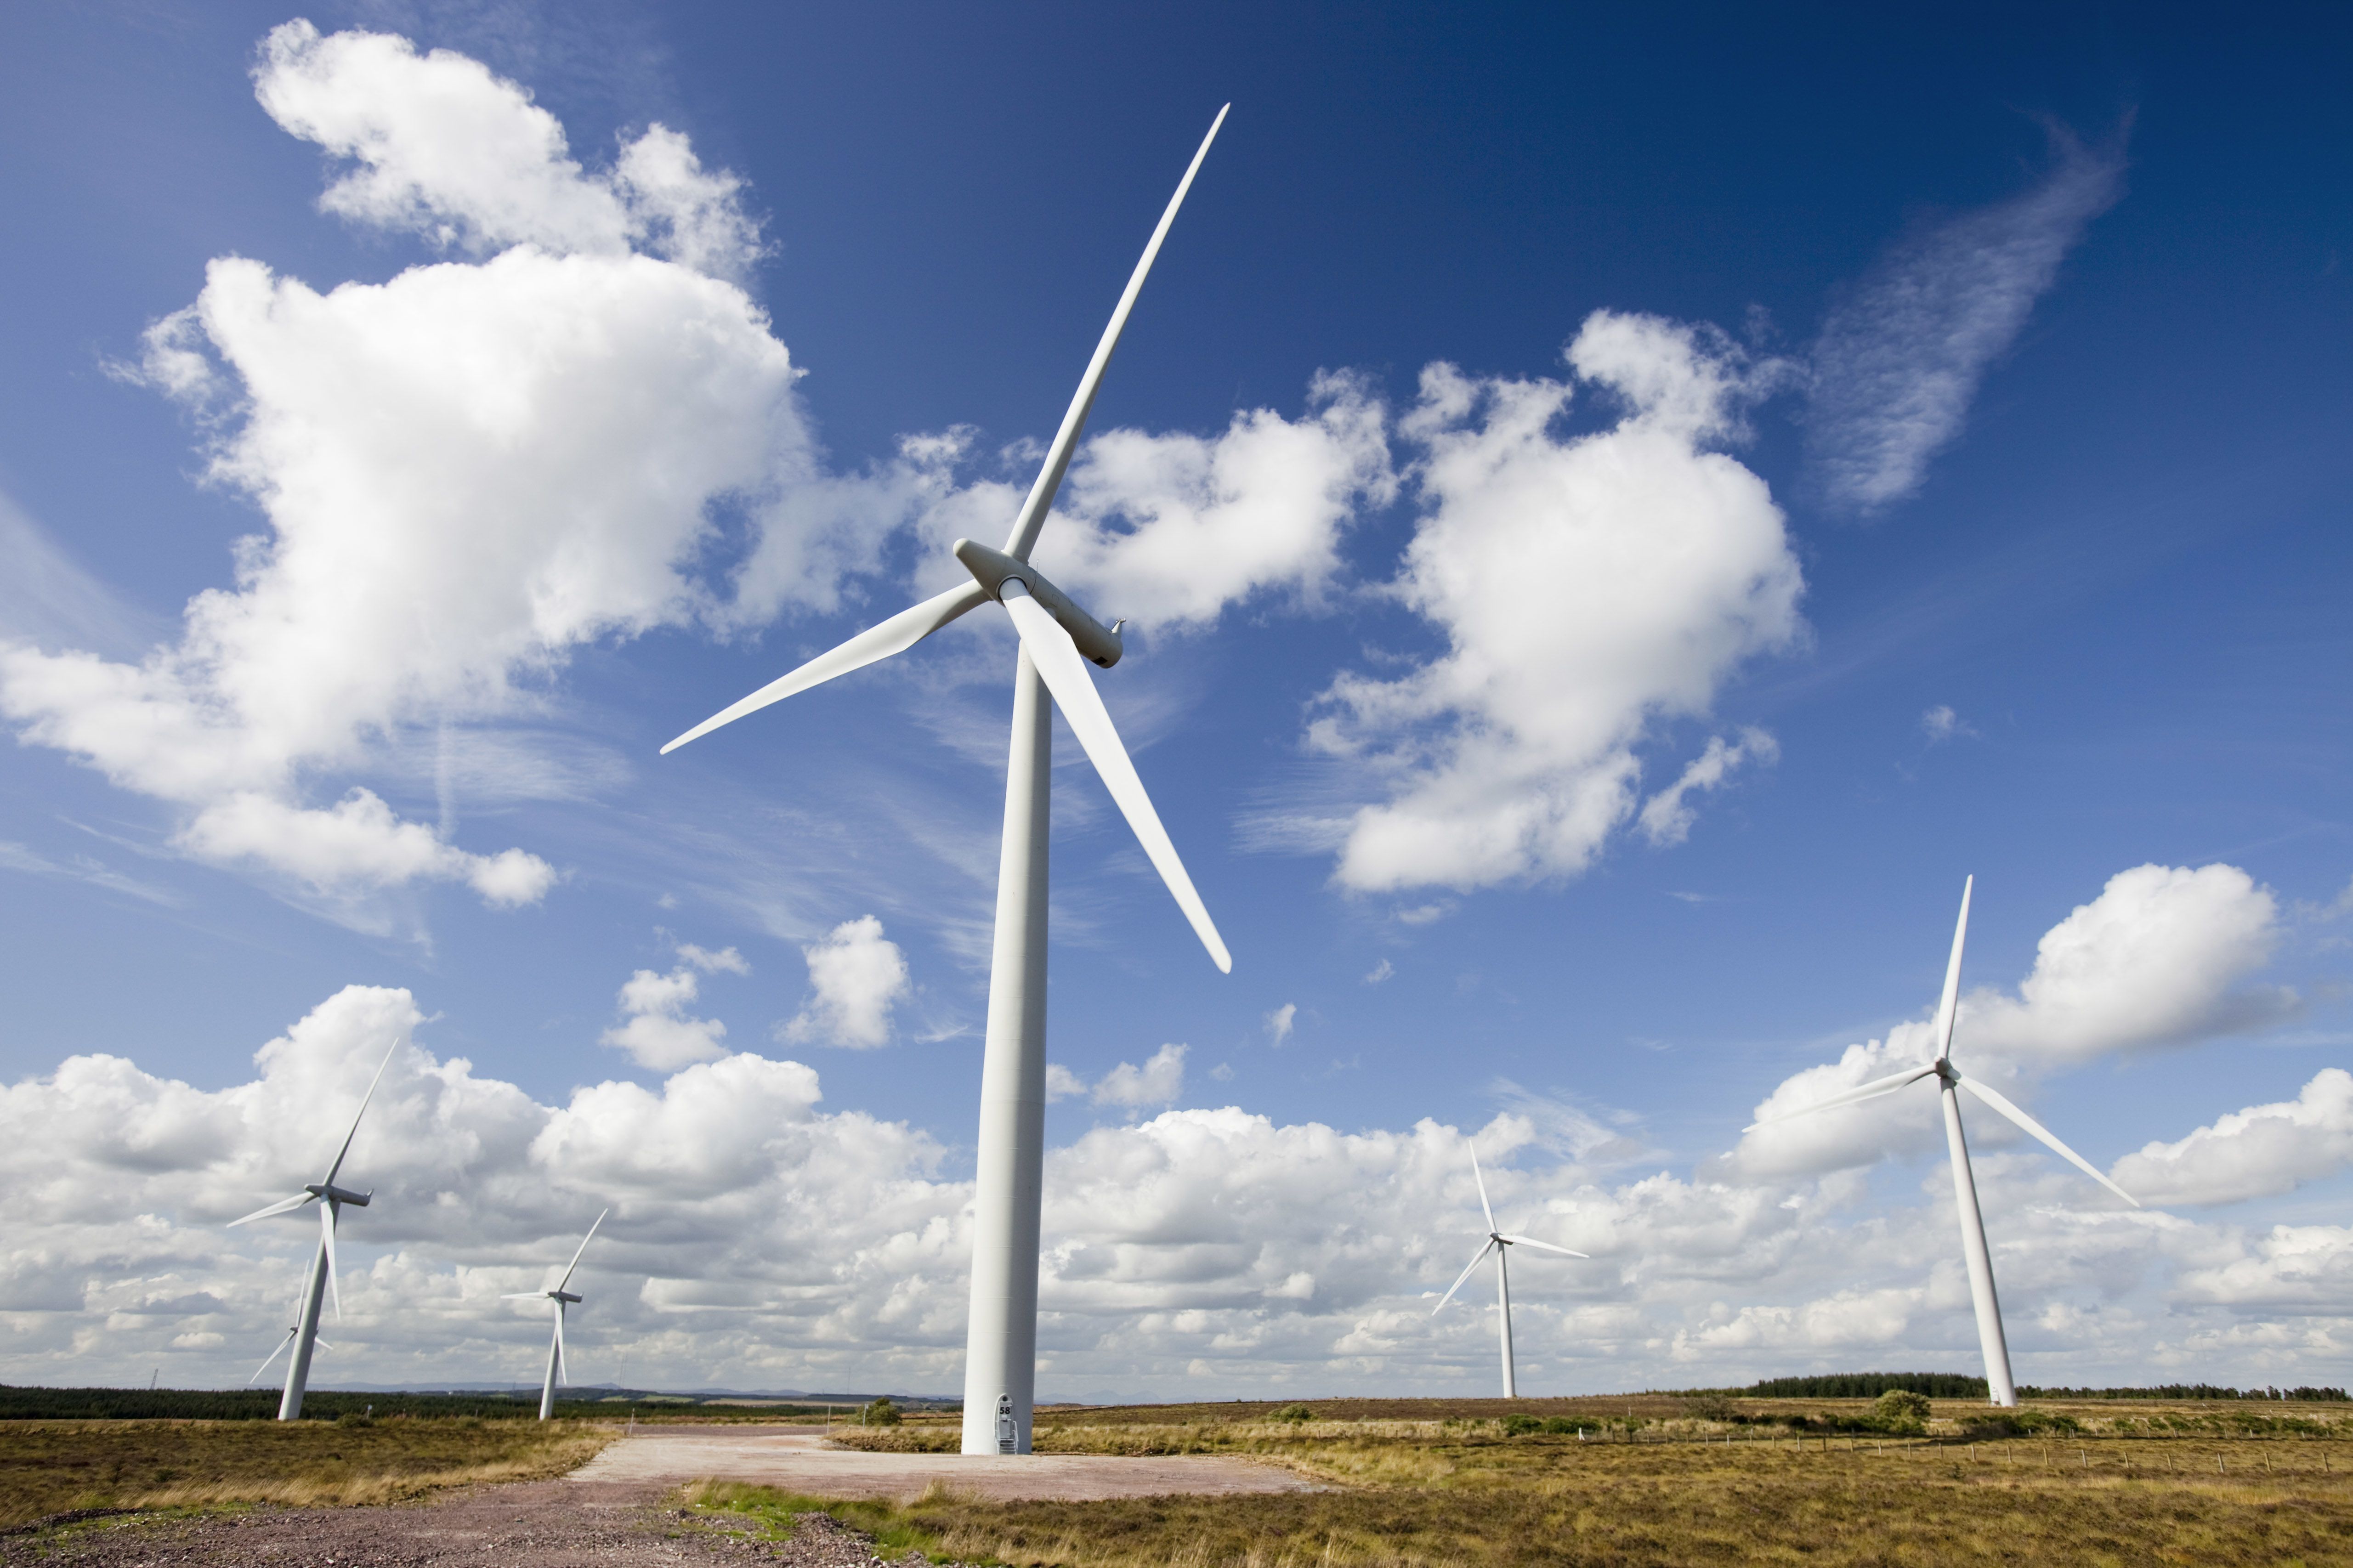 Scotland has produced enough wind energy to power its homes twice over